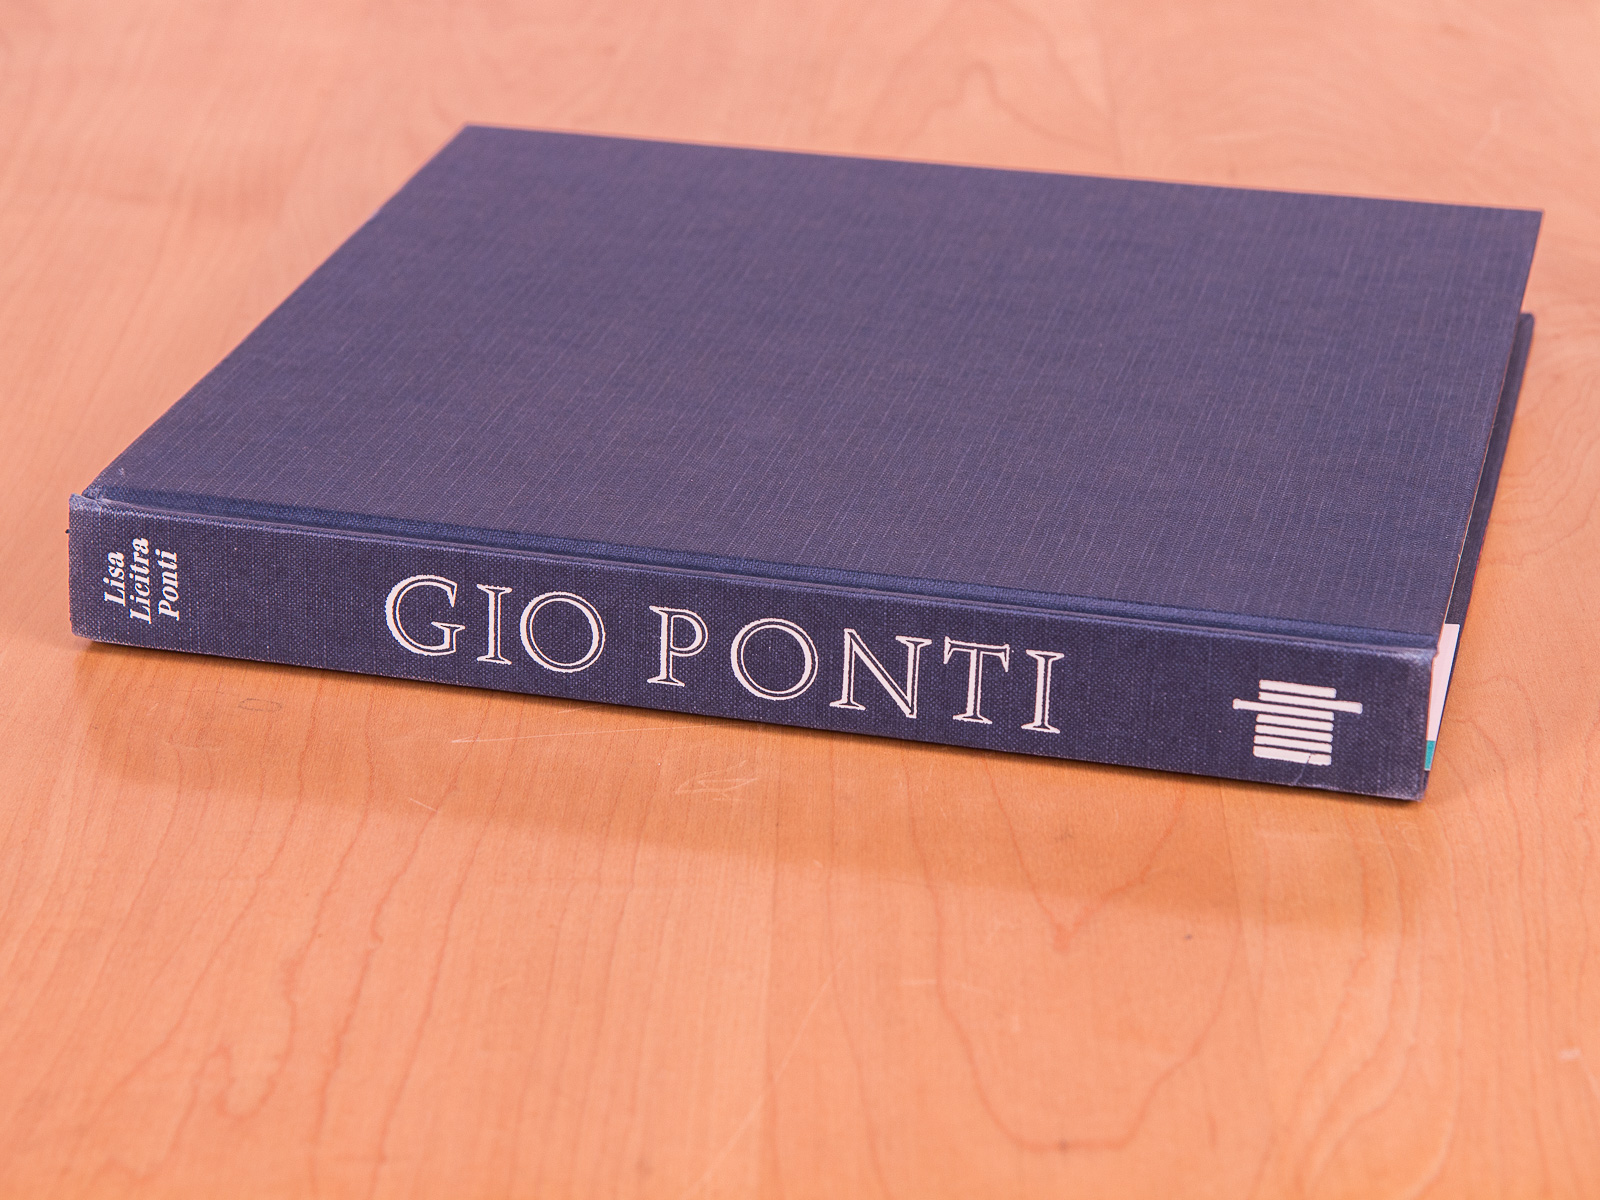 Gio Ponti: The Complete Work 1923-1978 — OAM